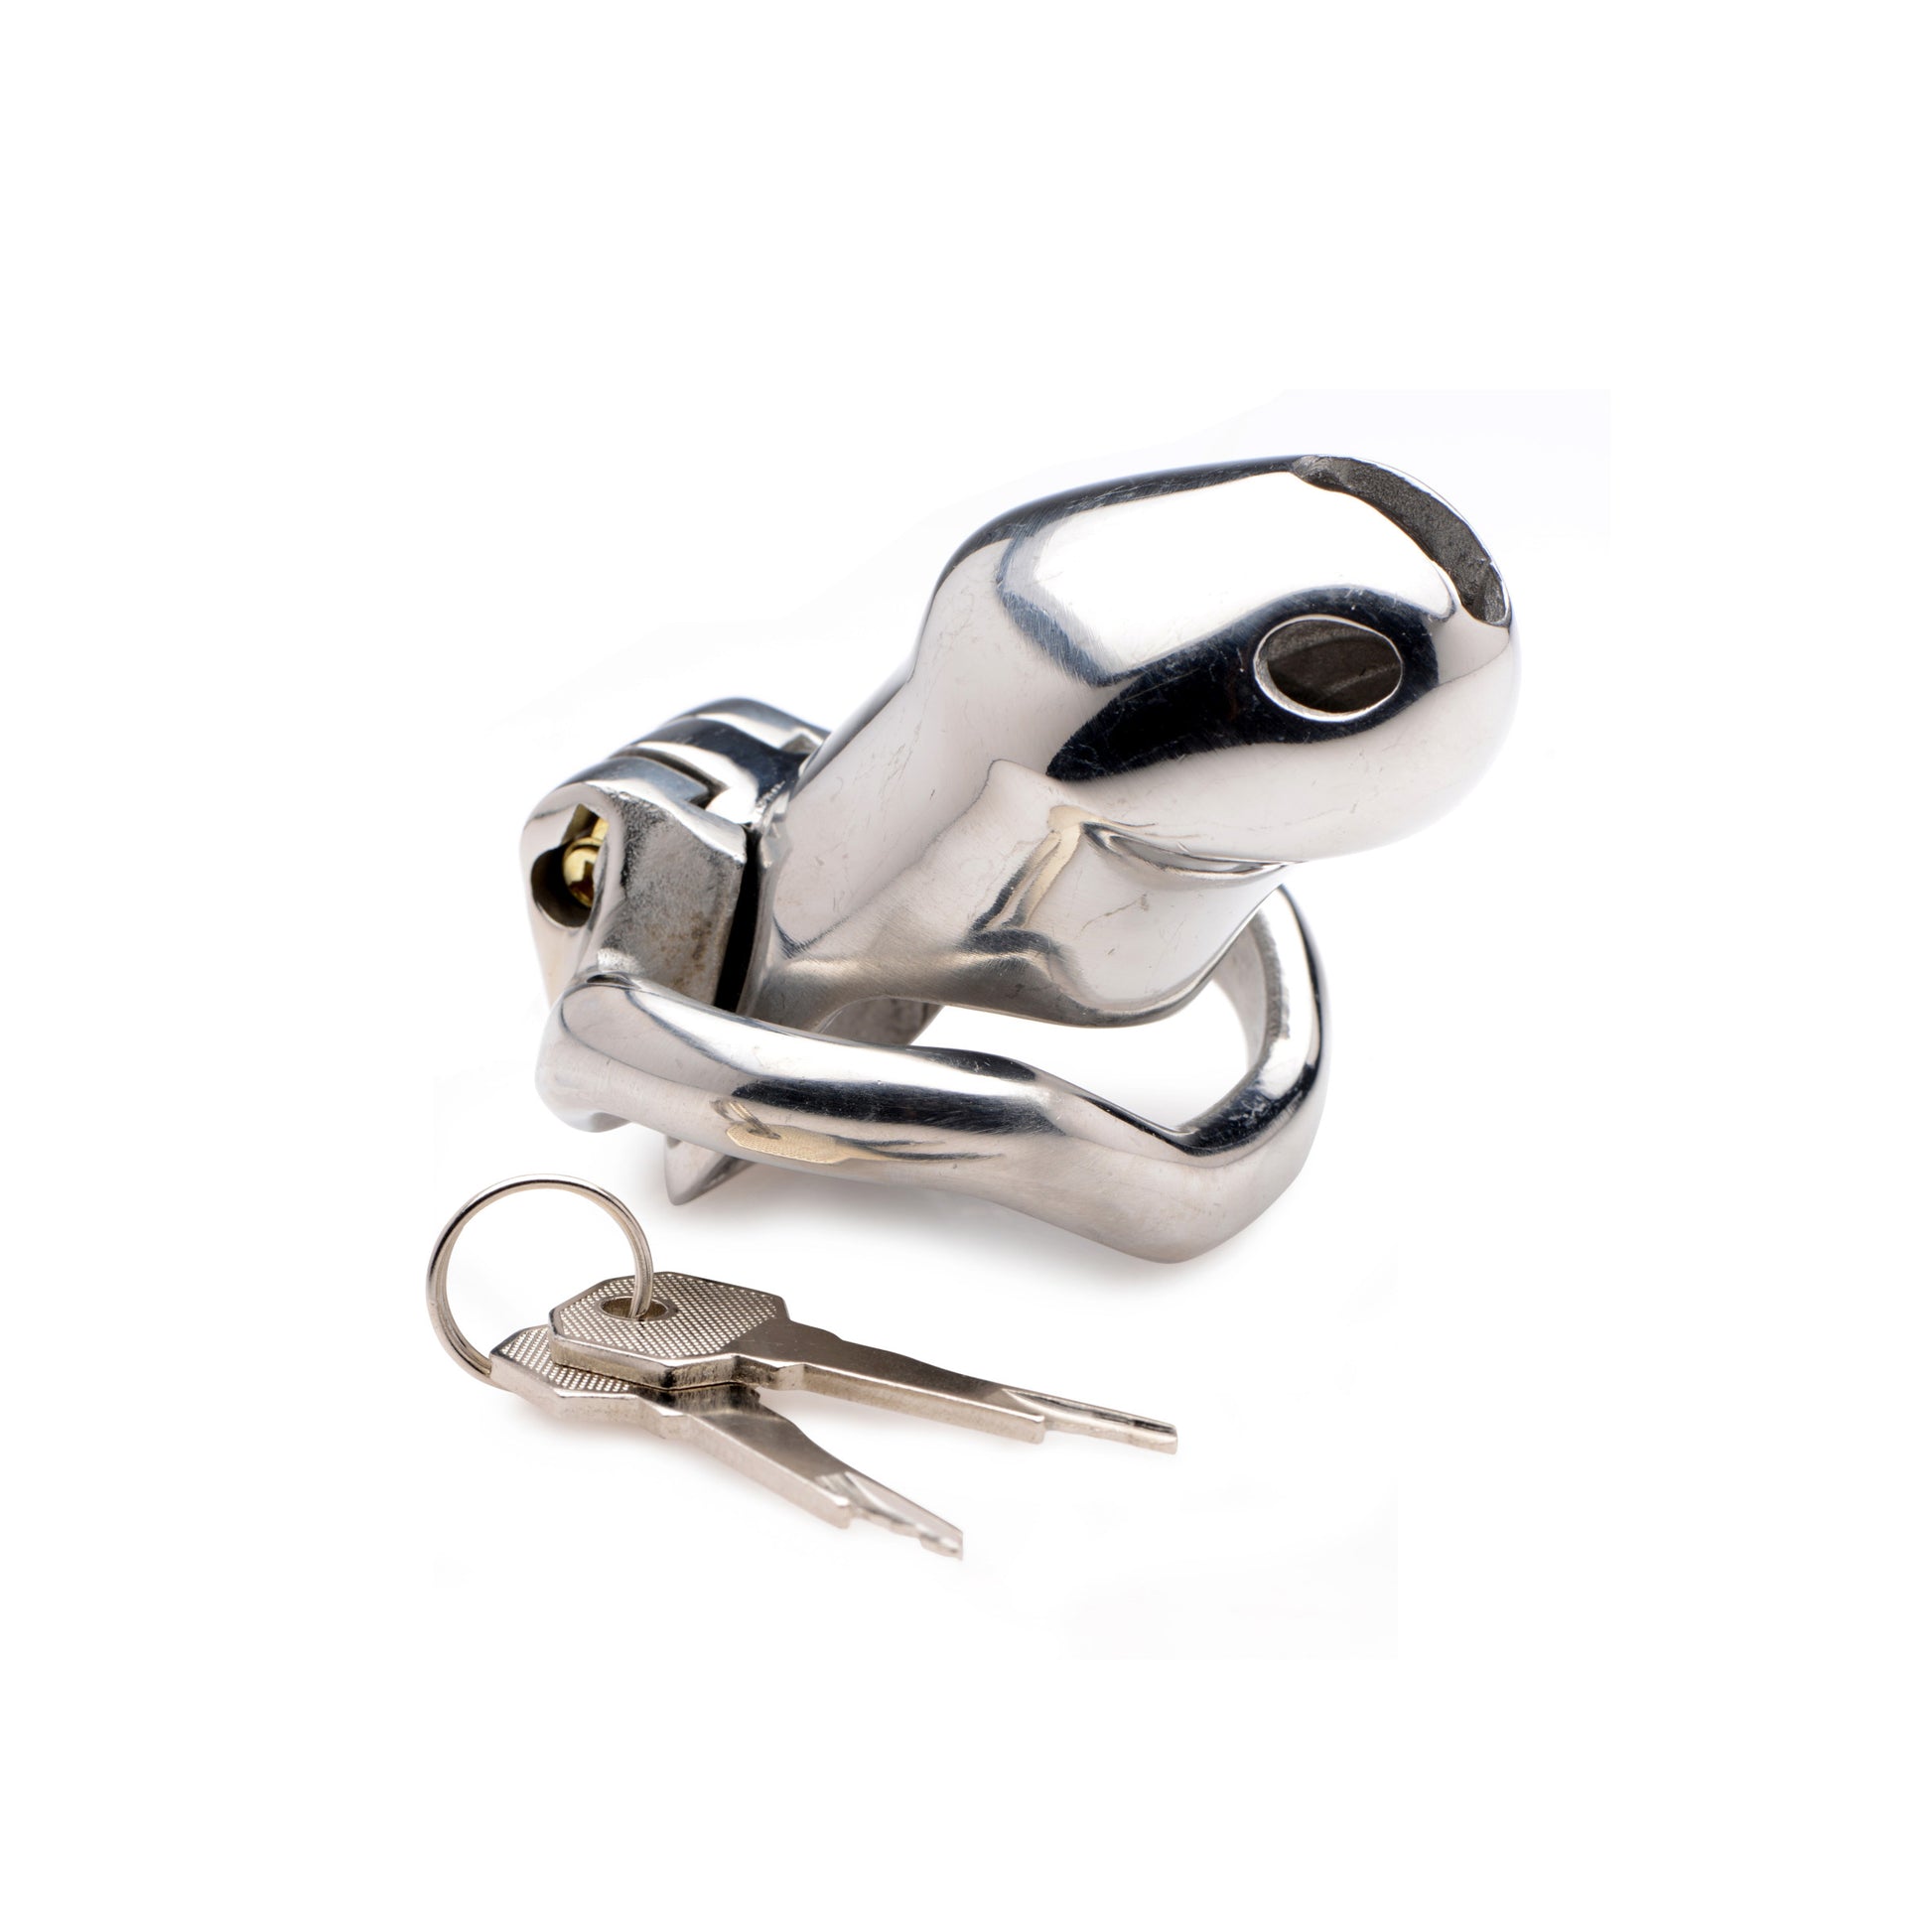 Rikers 24-7 Stainless Steel Locking Chastity Cage - UABDSM